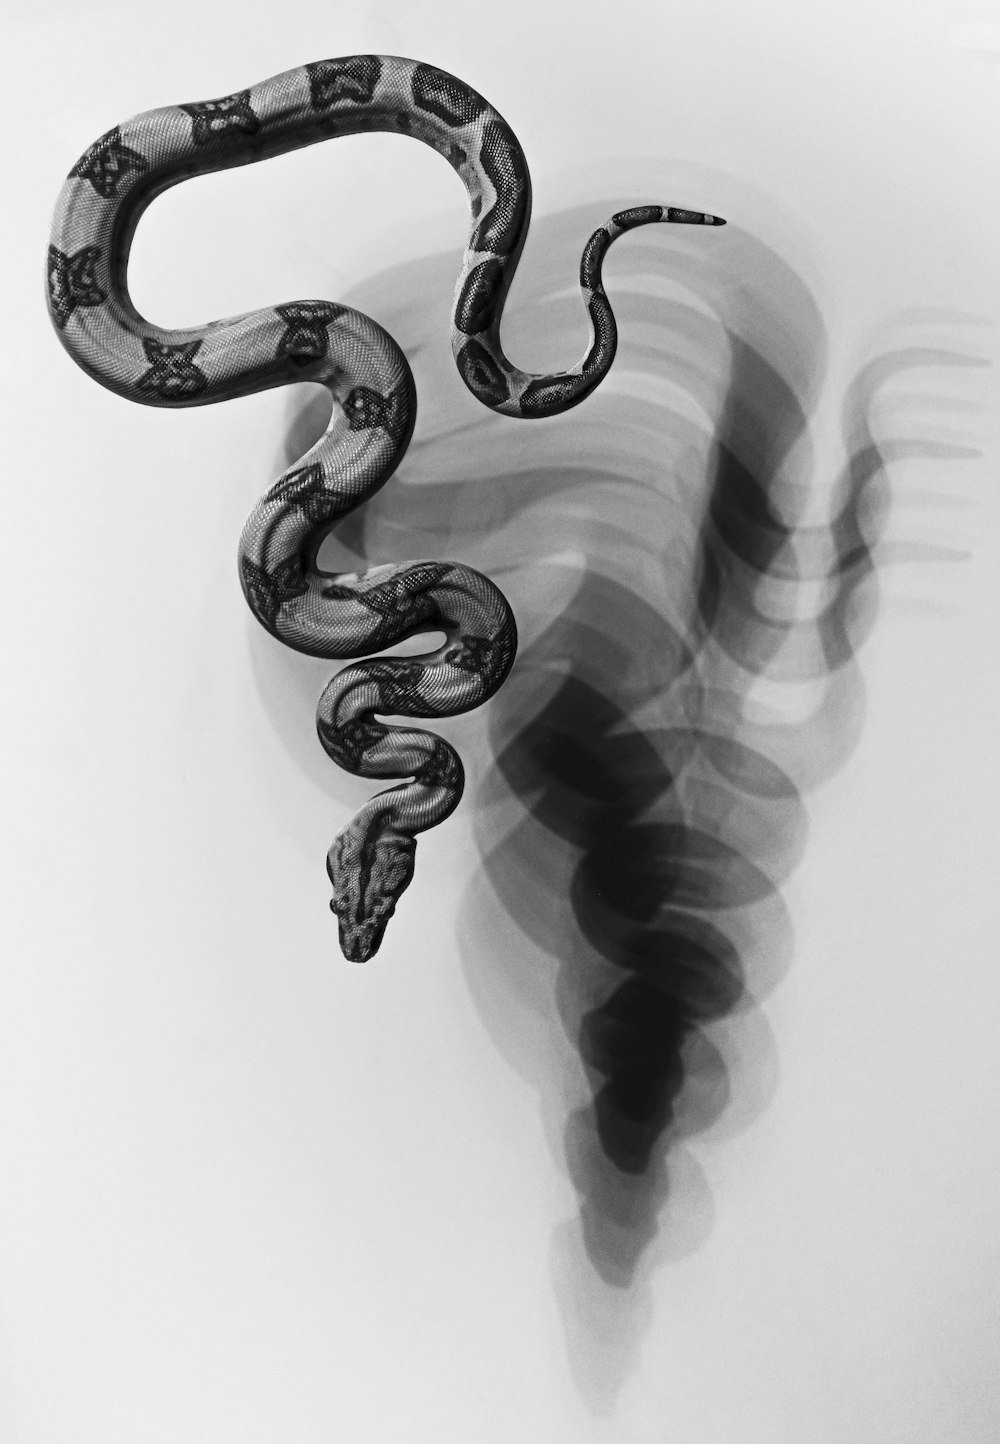 a black and white photo of a snake